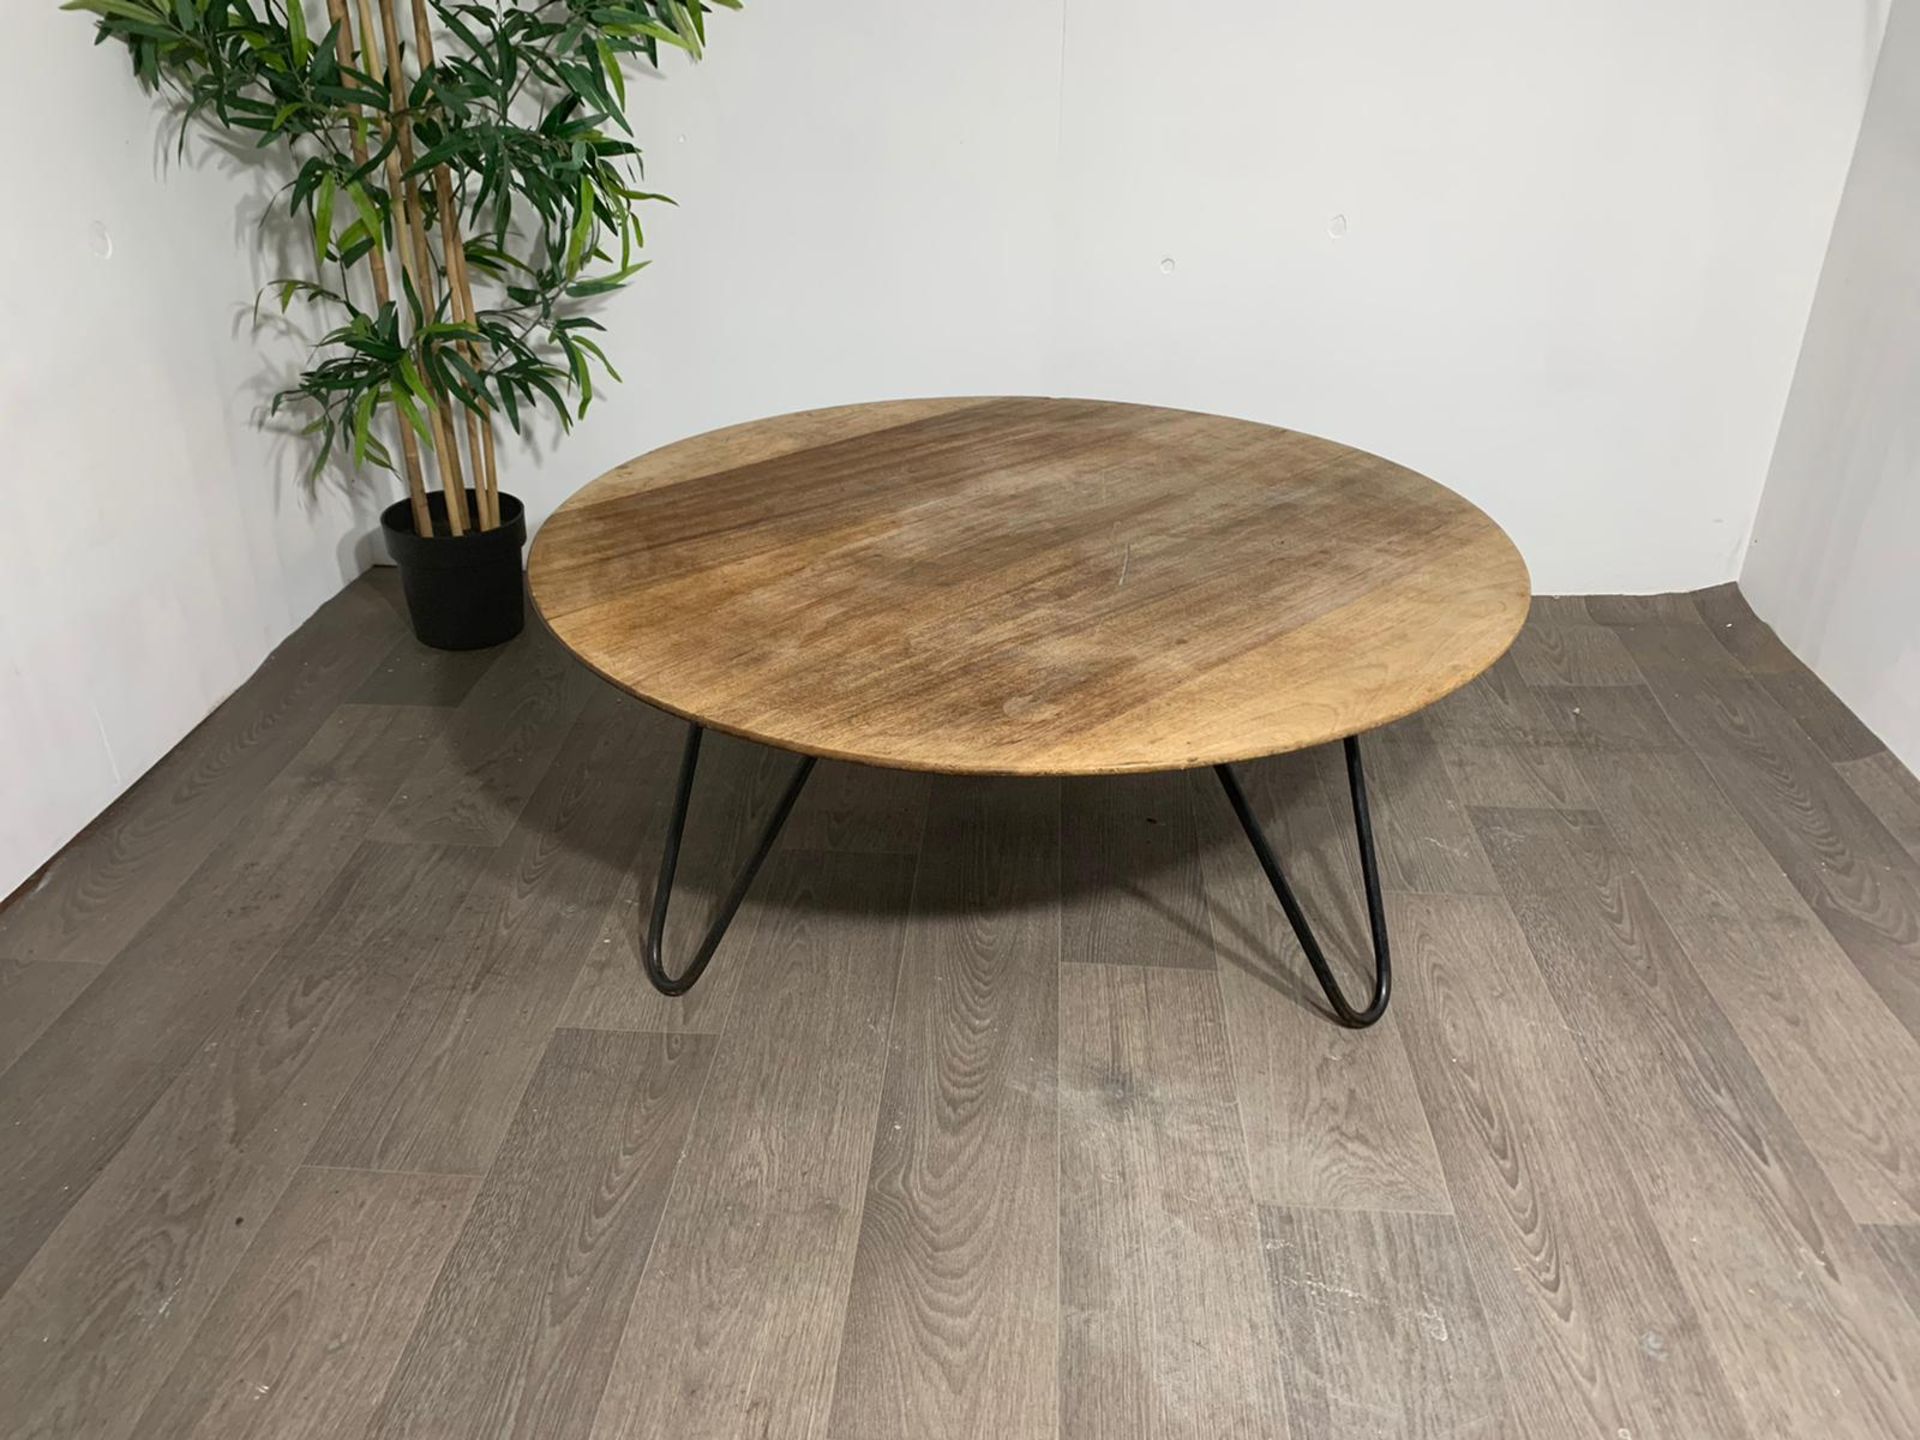 Wooden Tripod Coffee Table - Image 5 of 5